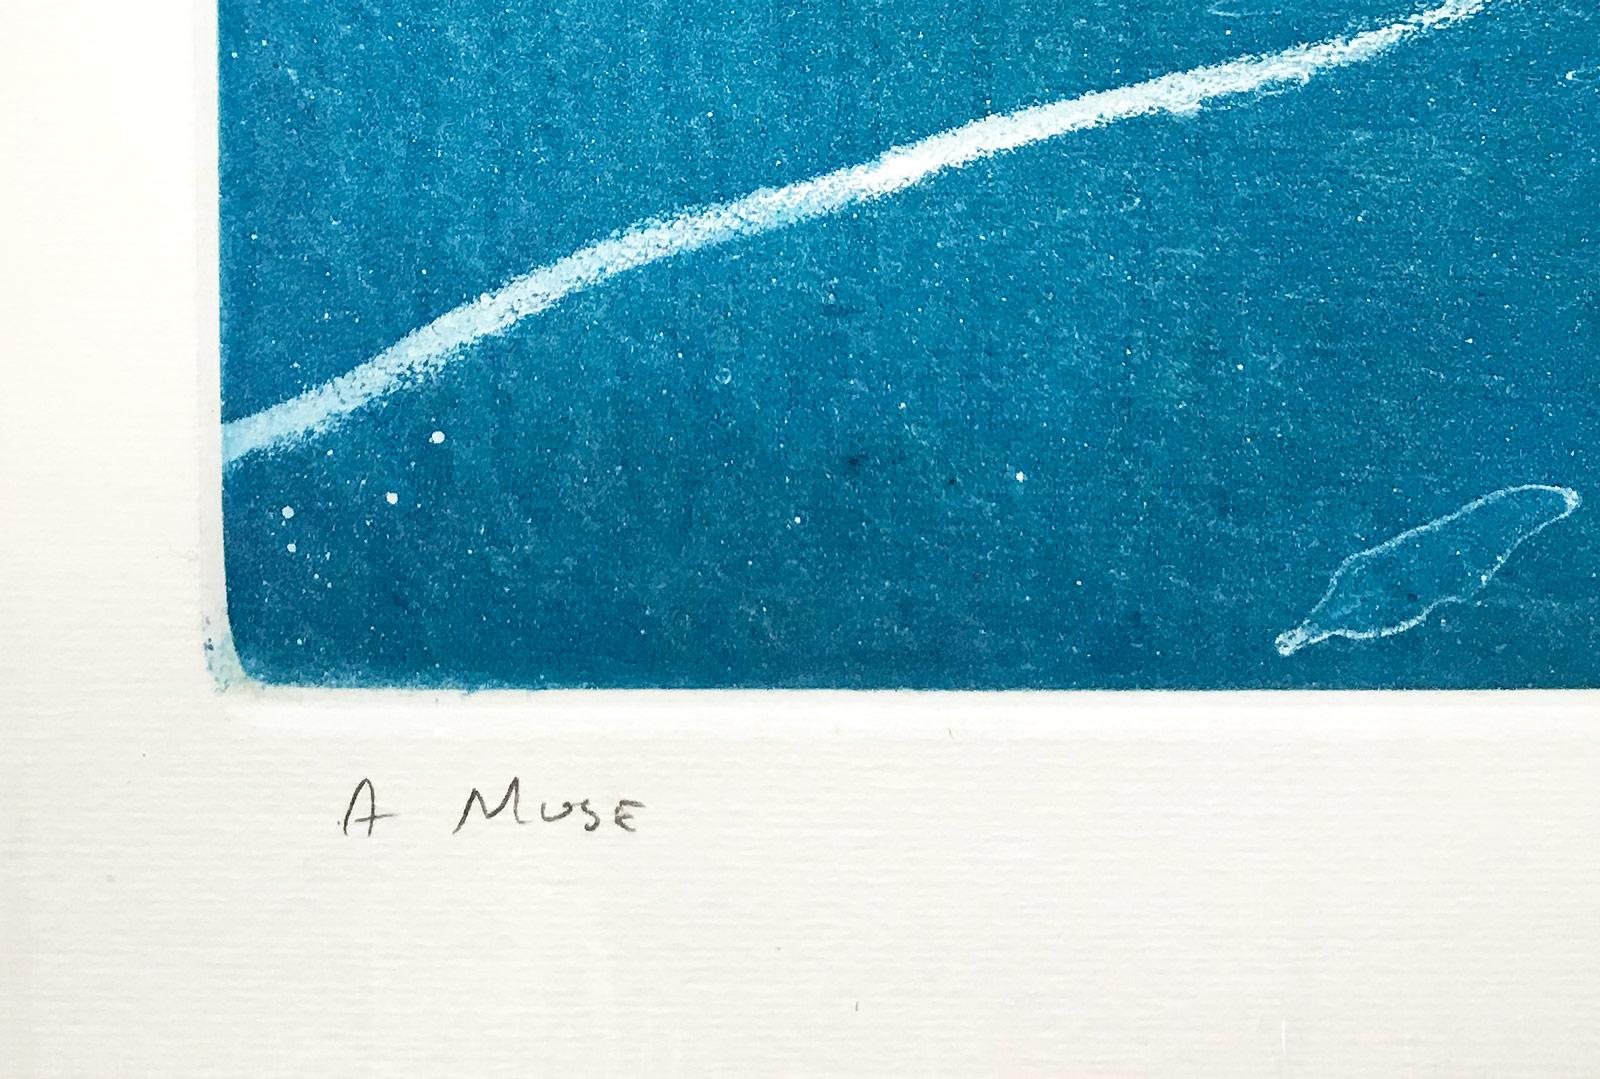 Muse (a young novice in colorful swim suit struggles thru a pool of blue) - American Modern Print by Art Werger